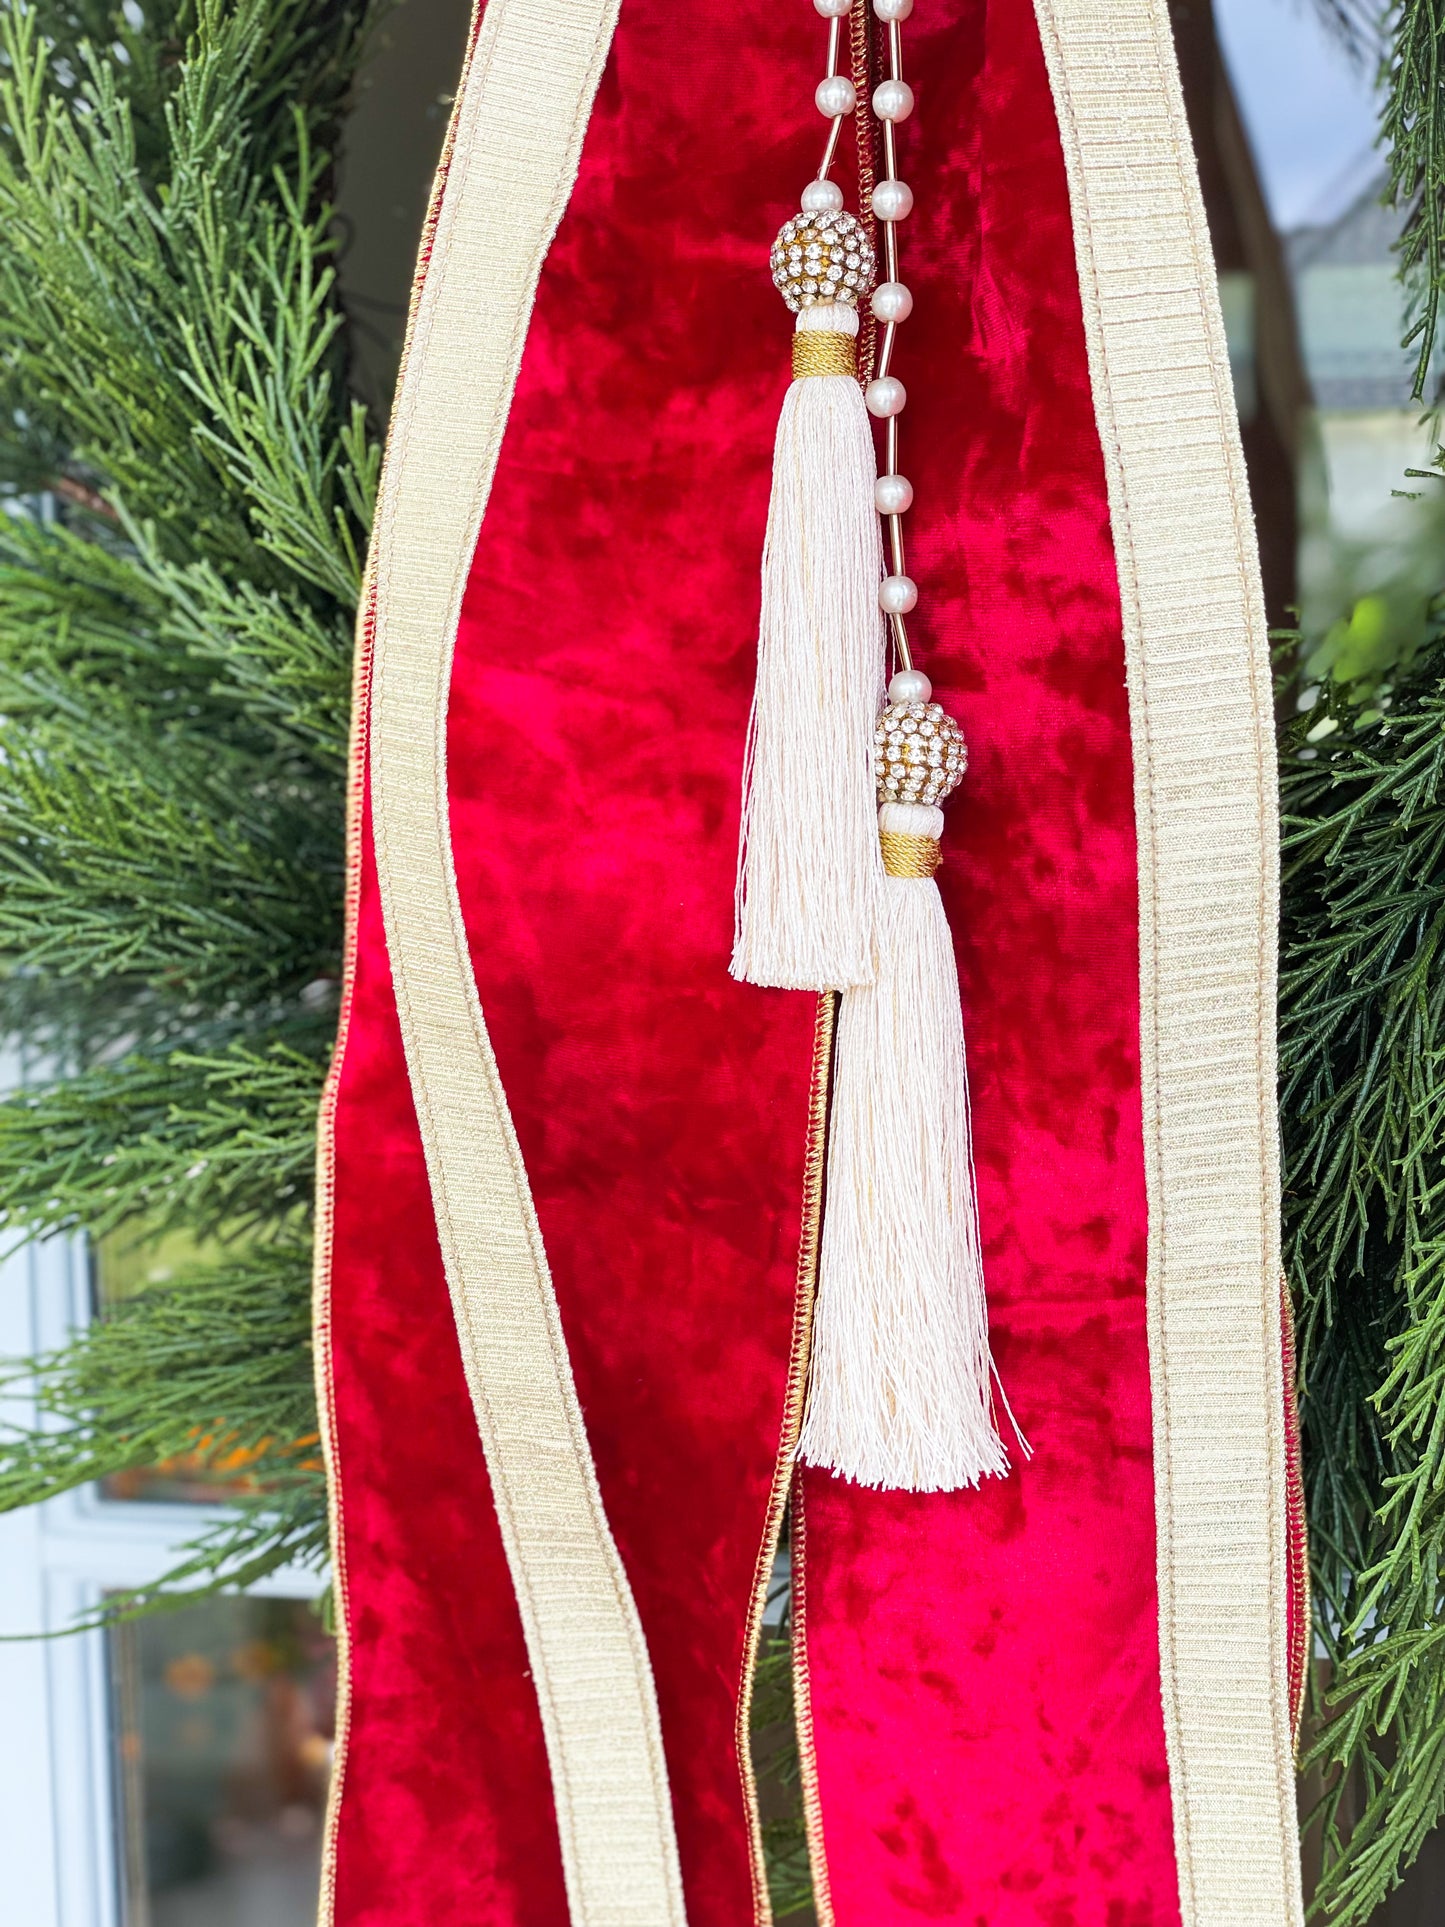 The Red Noel Cedar Wreath And Bow With Pearl Tassel.